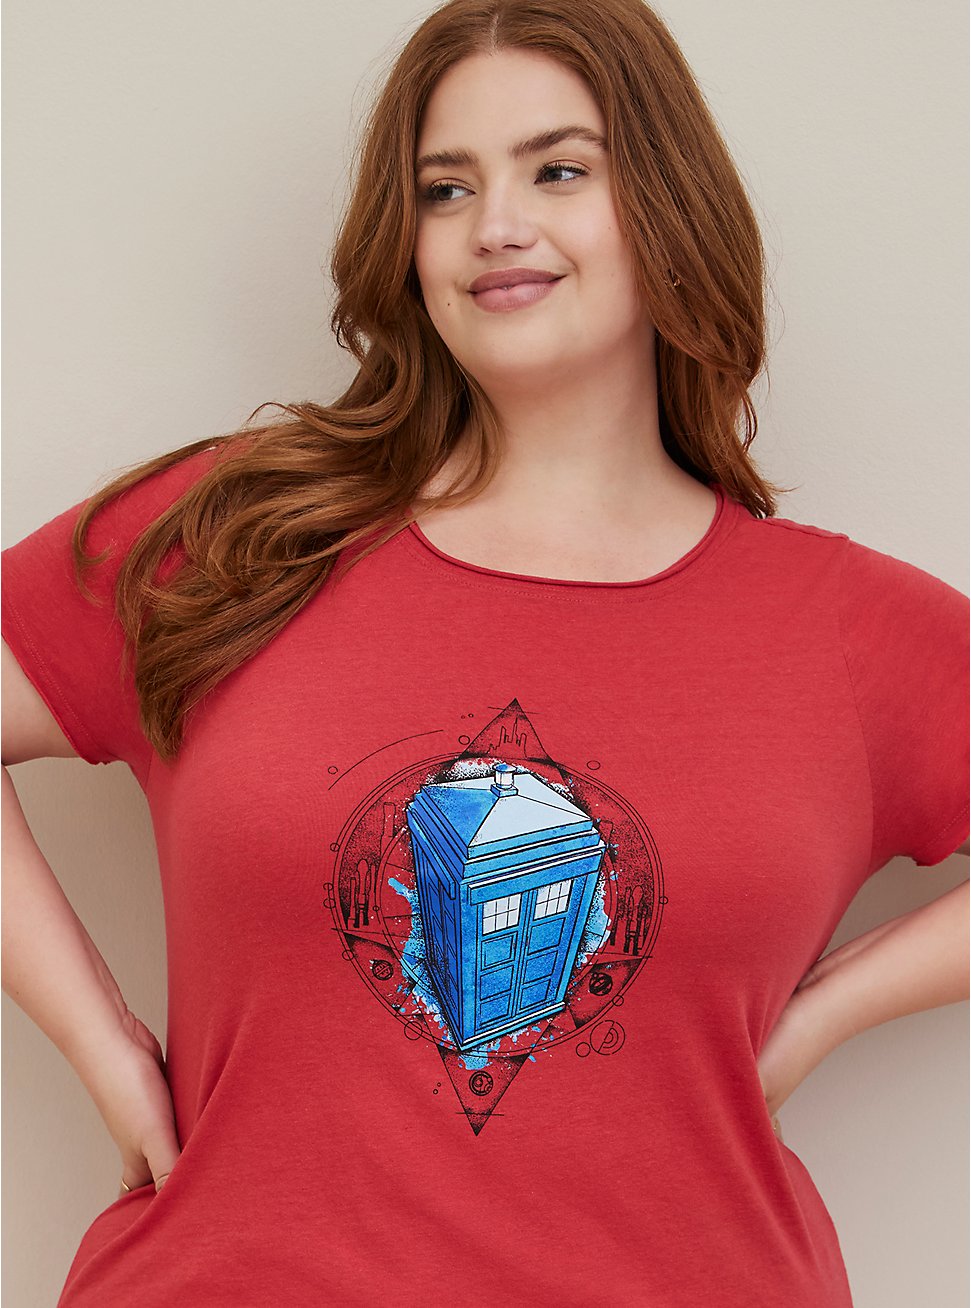 BBC Doctor Who Distressed Top - Triblend Jersey Tardis Red, AMERICAN BEAUTY, hi-res